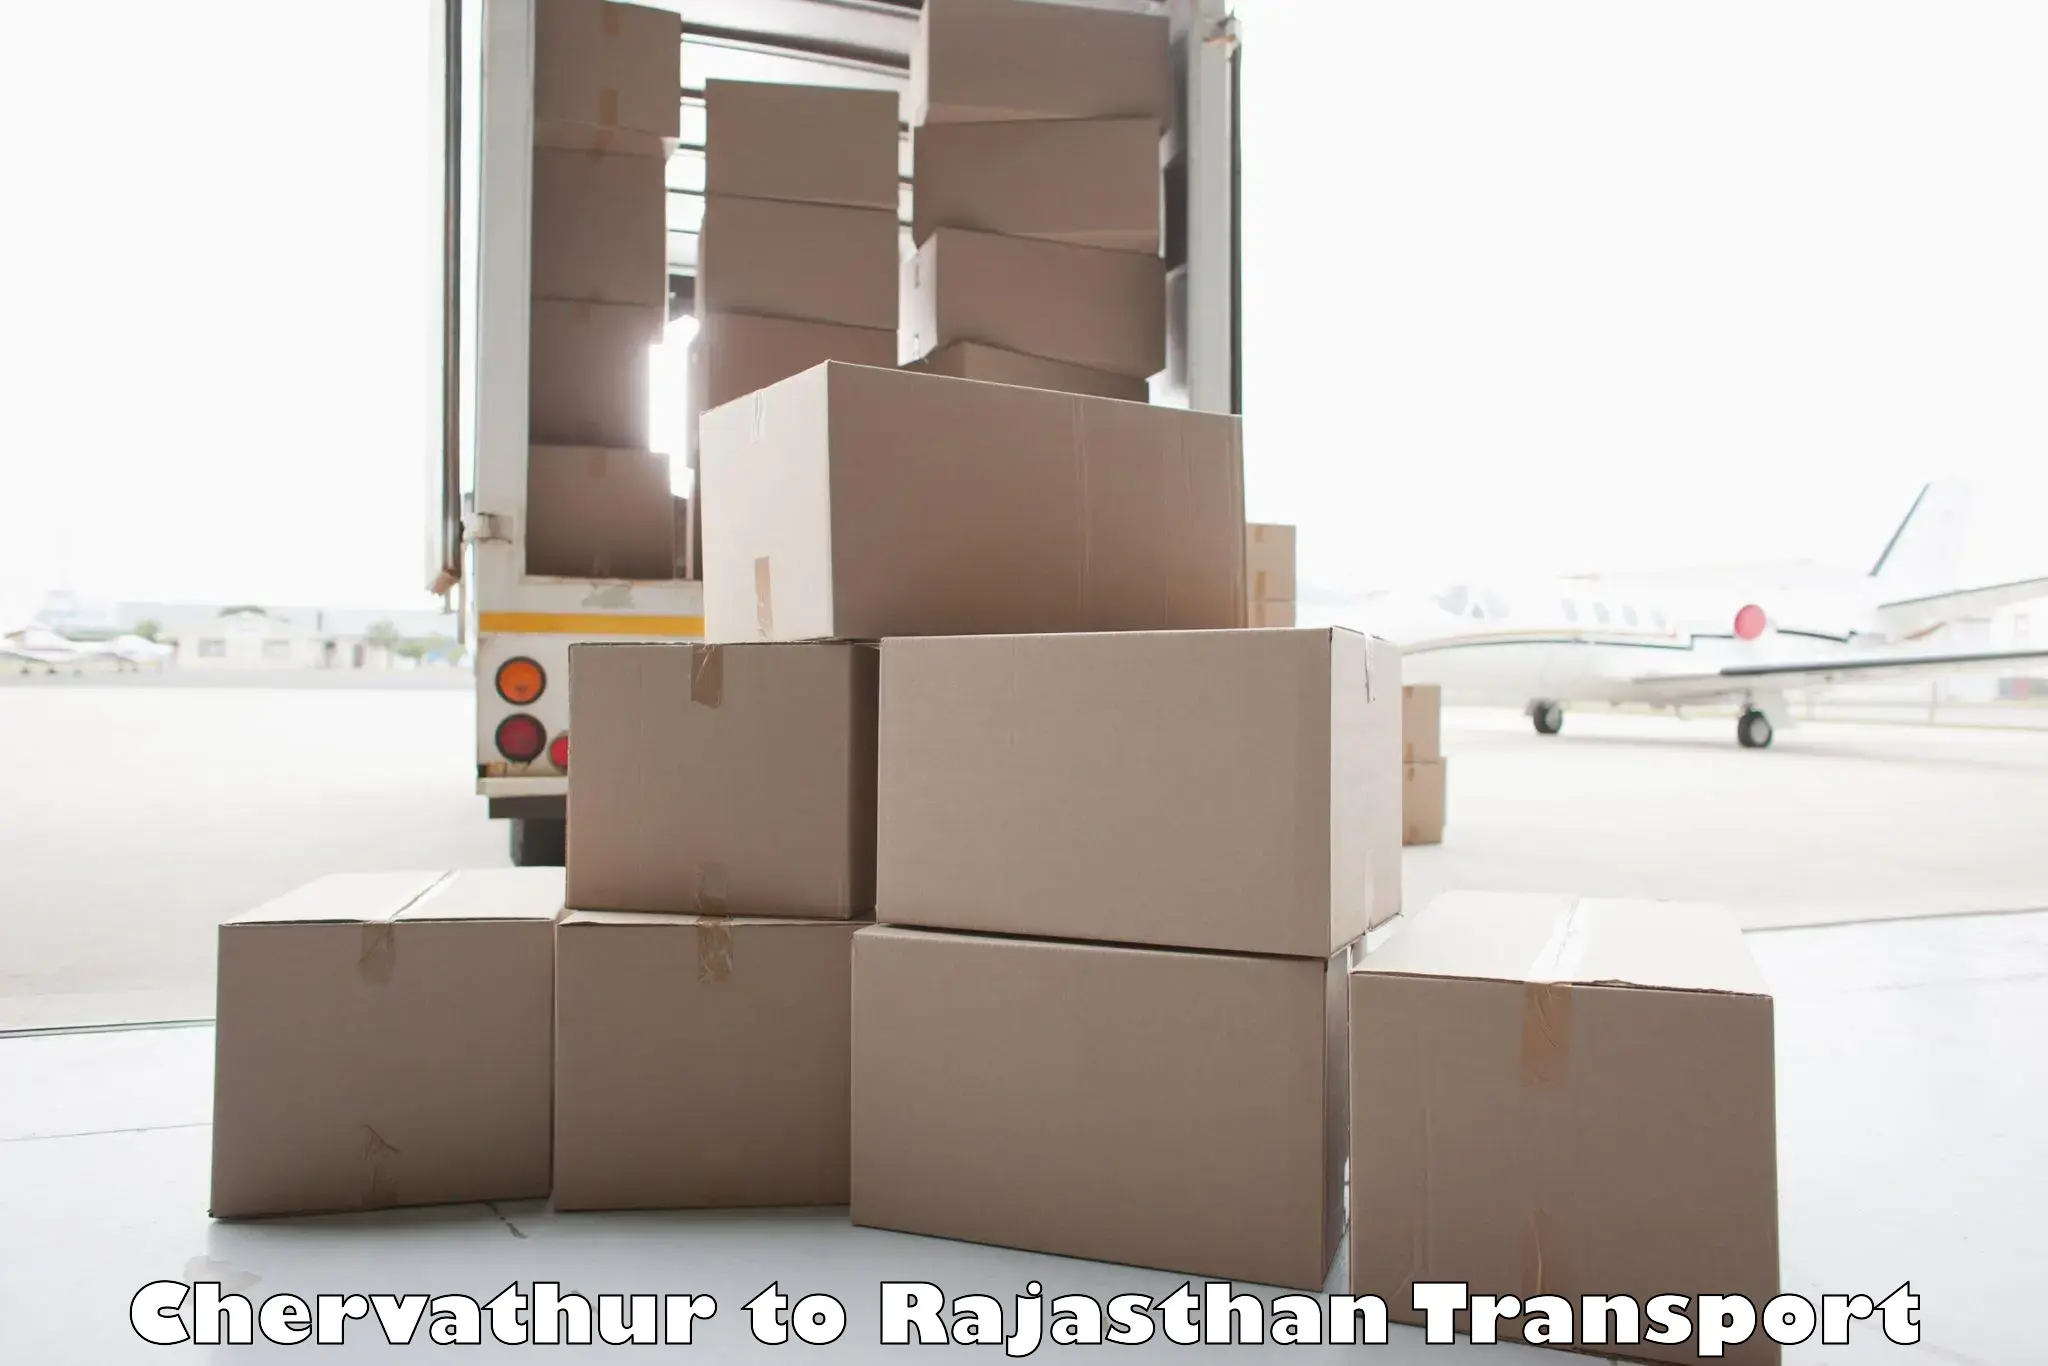 Truck transport companies in India Chervathur to Pokhran